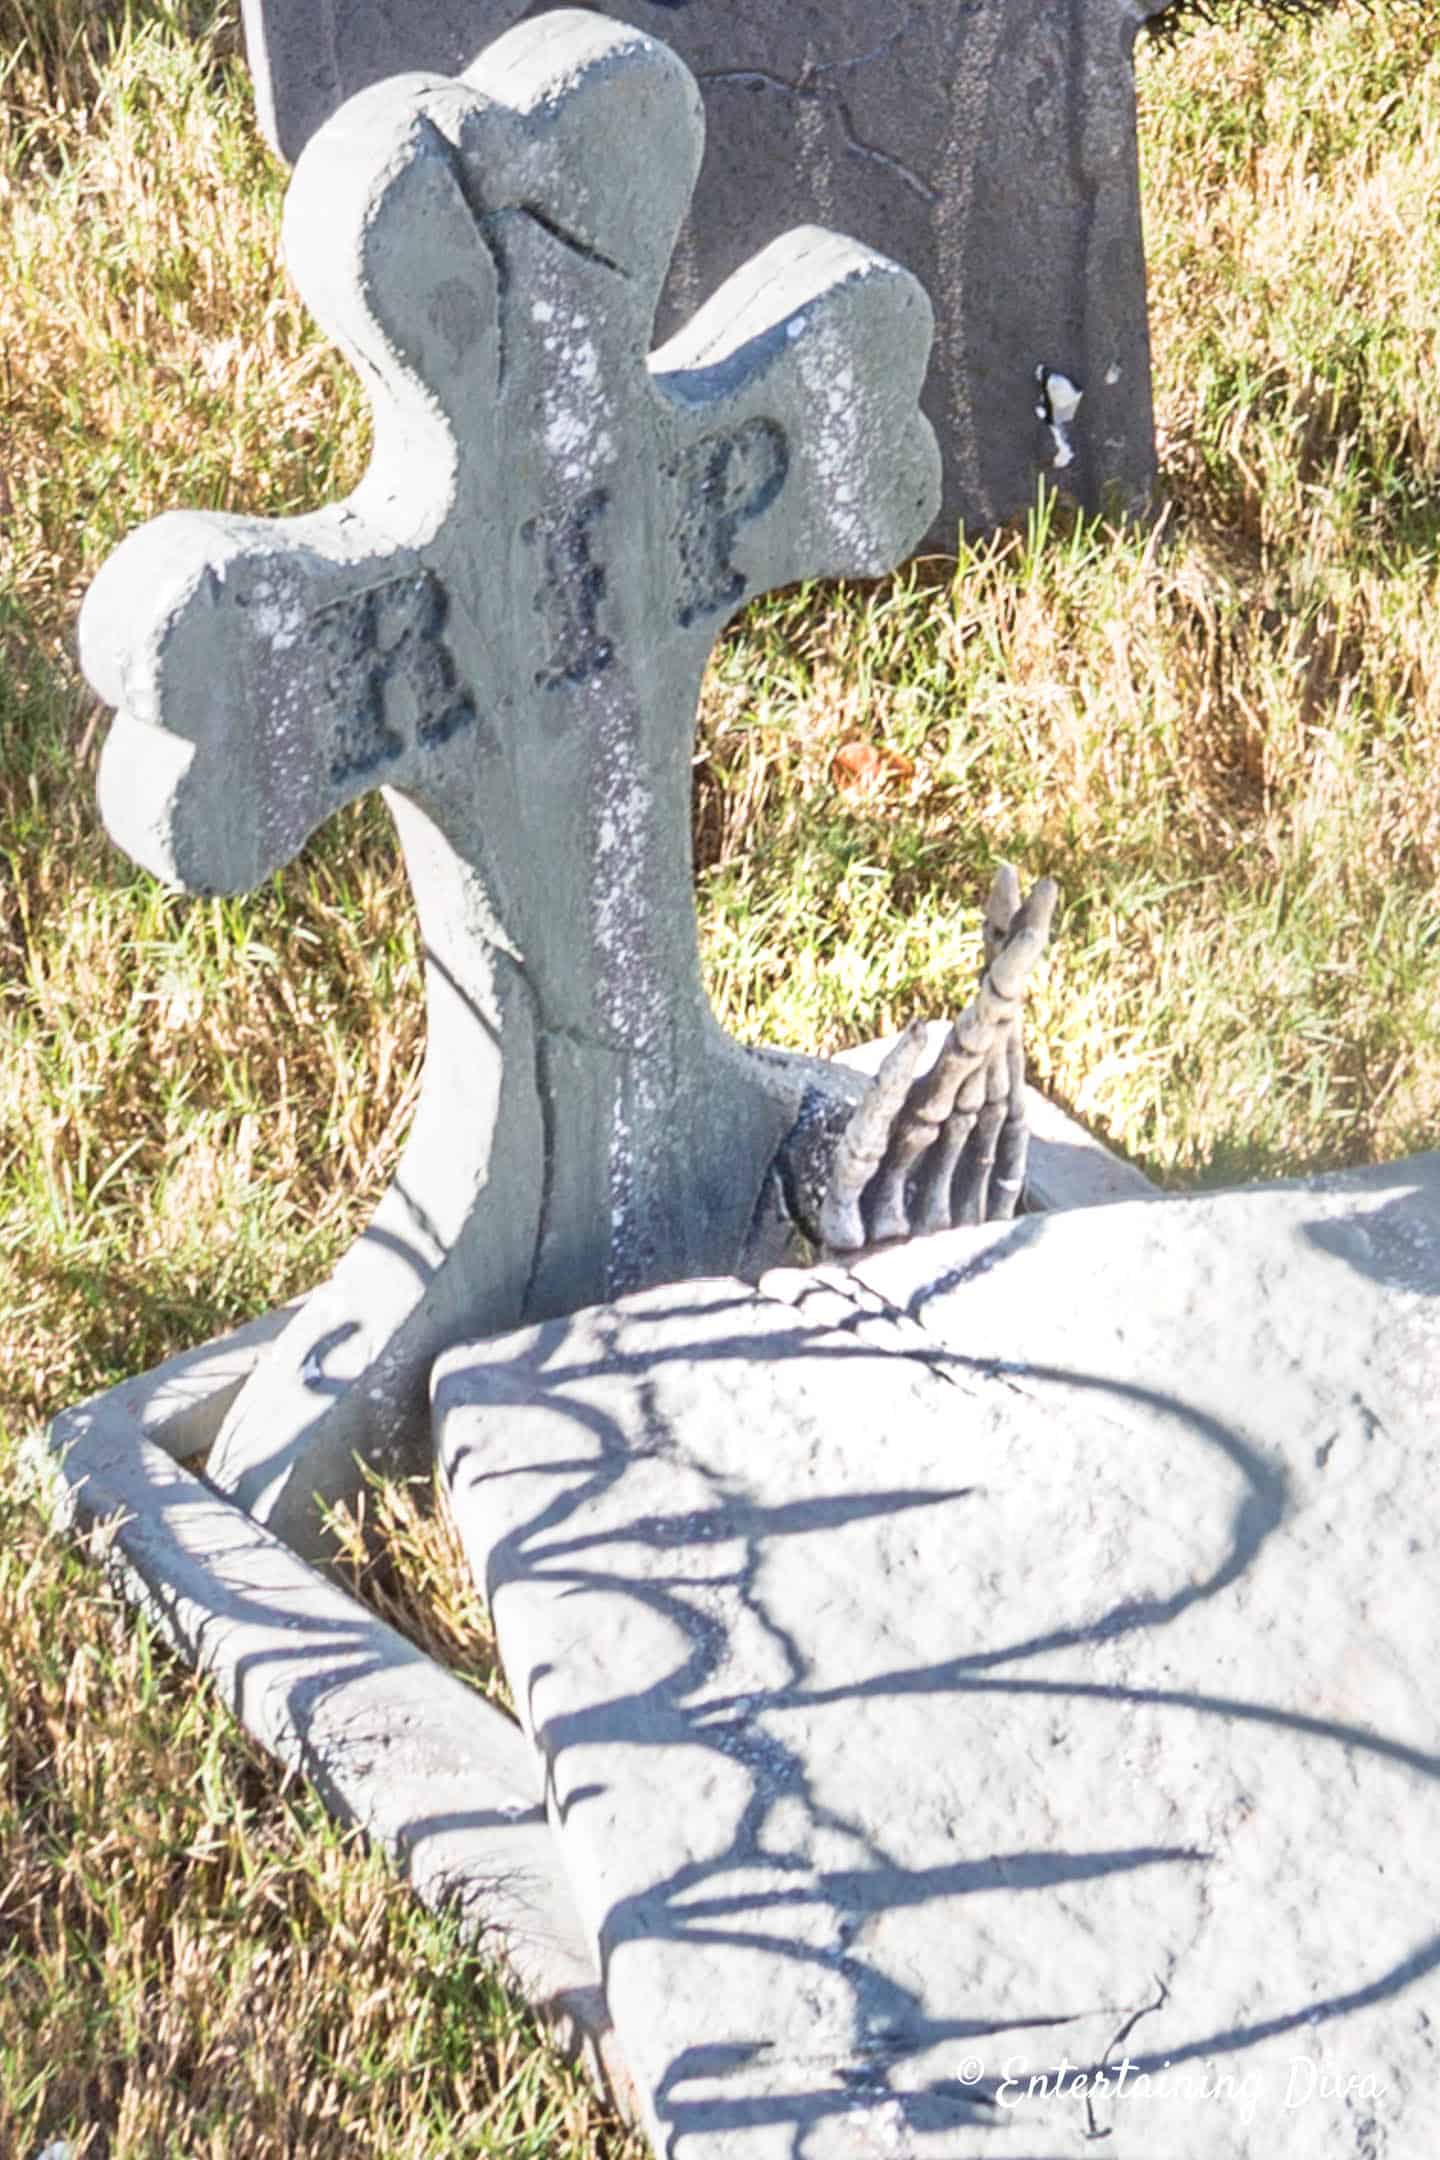 Skeleton hand coming out of Halloween grave